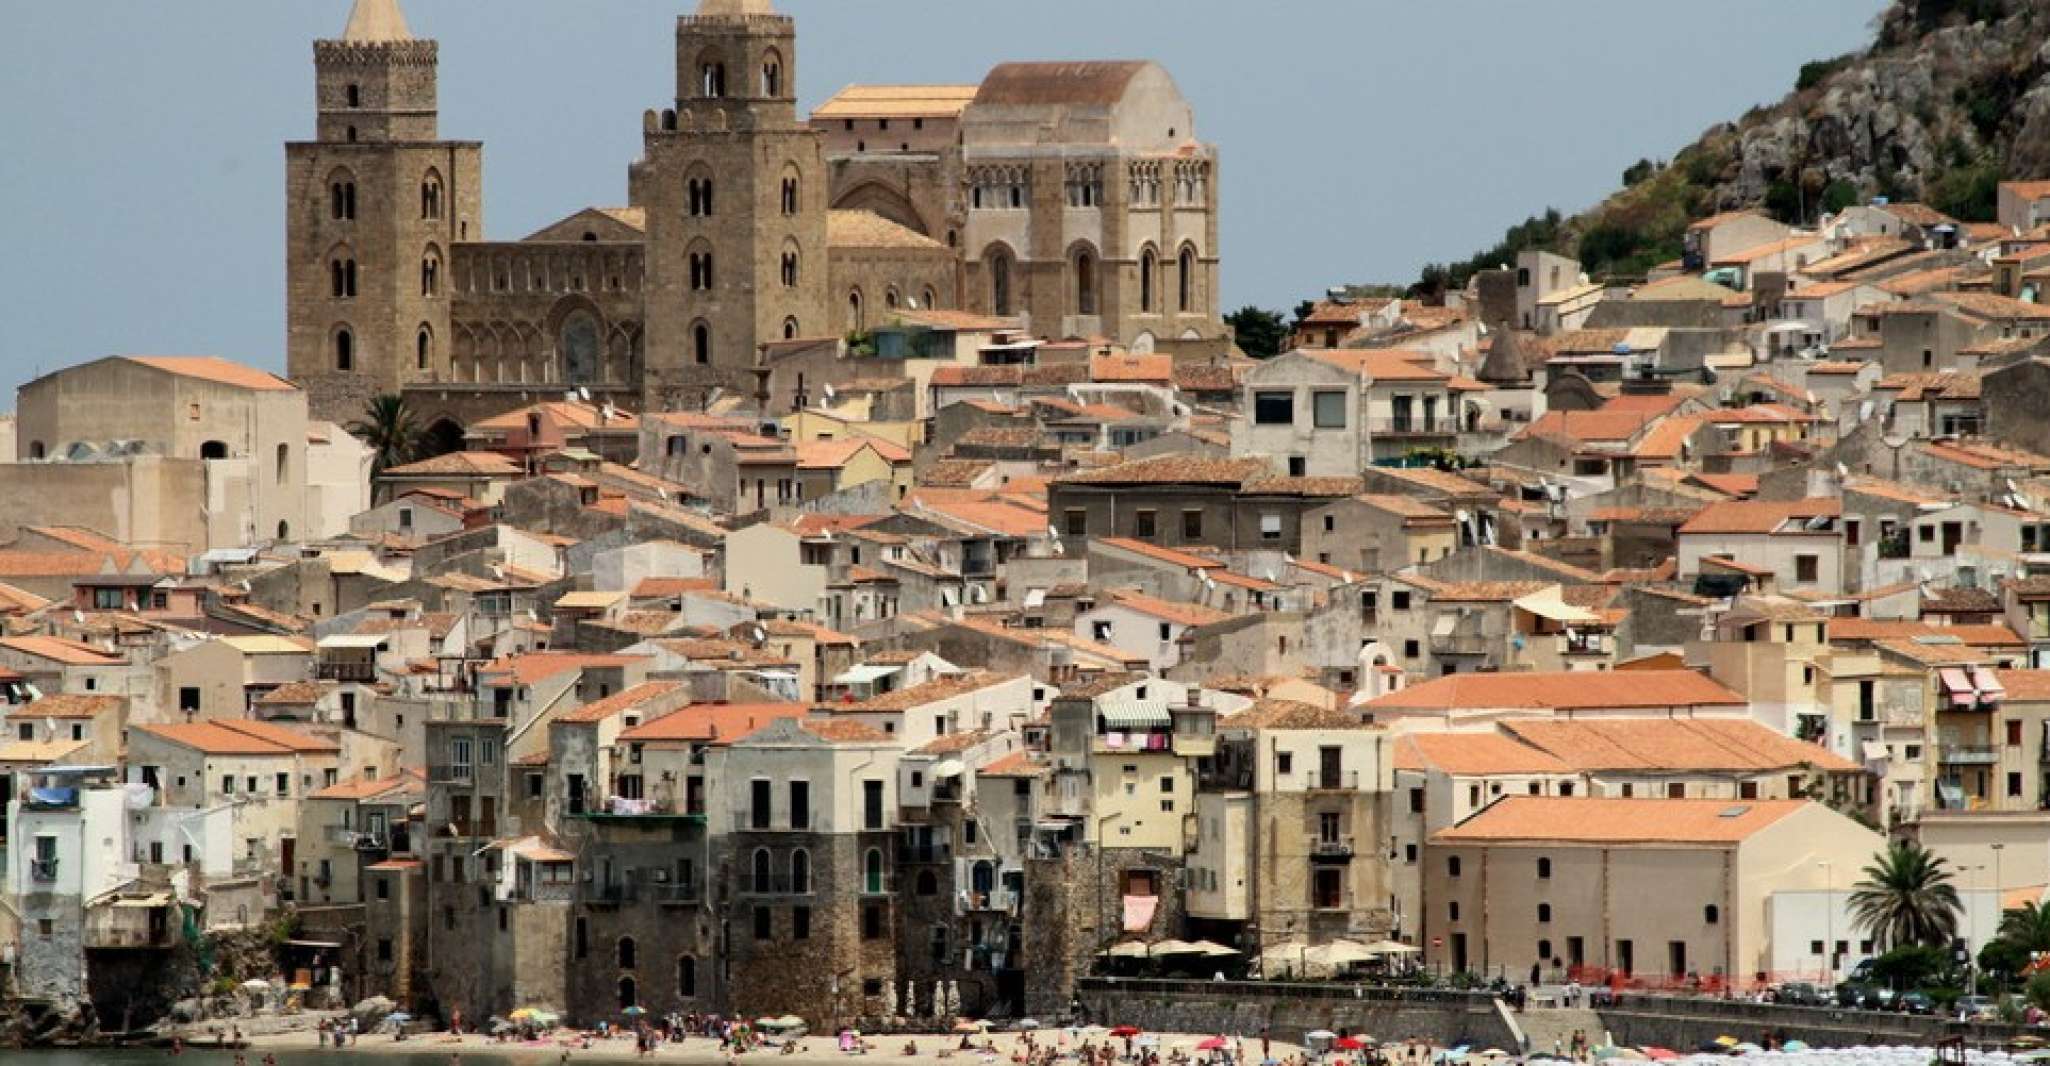 From Palermo, Monreale and Cefalù Half-Day Trip - Housity